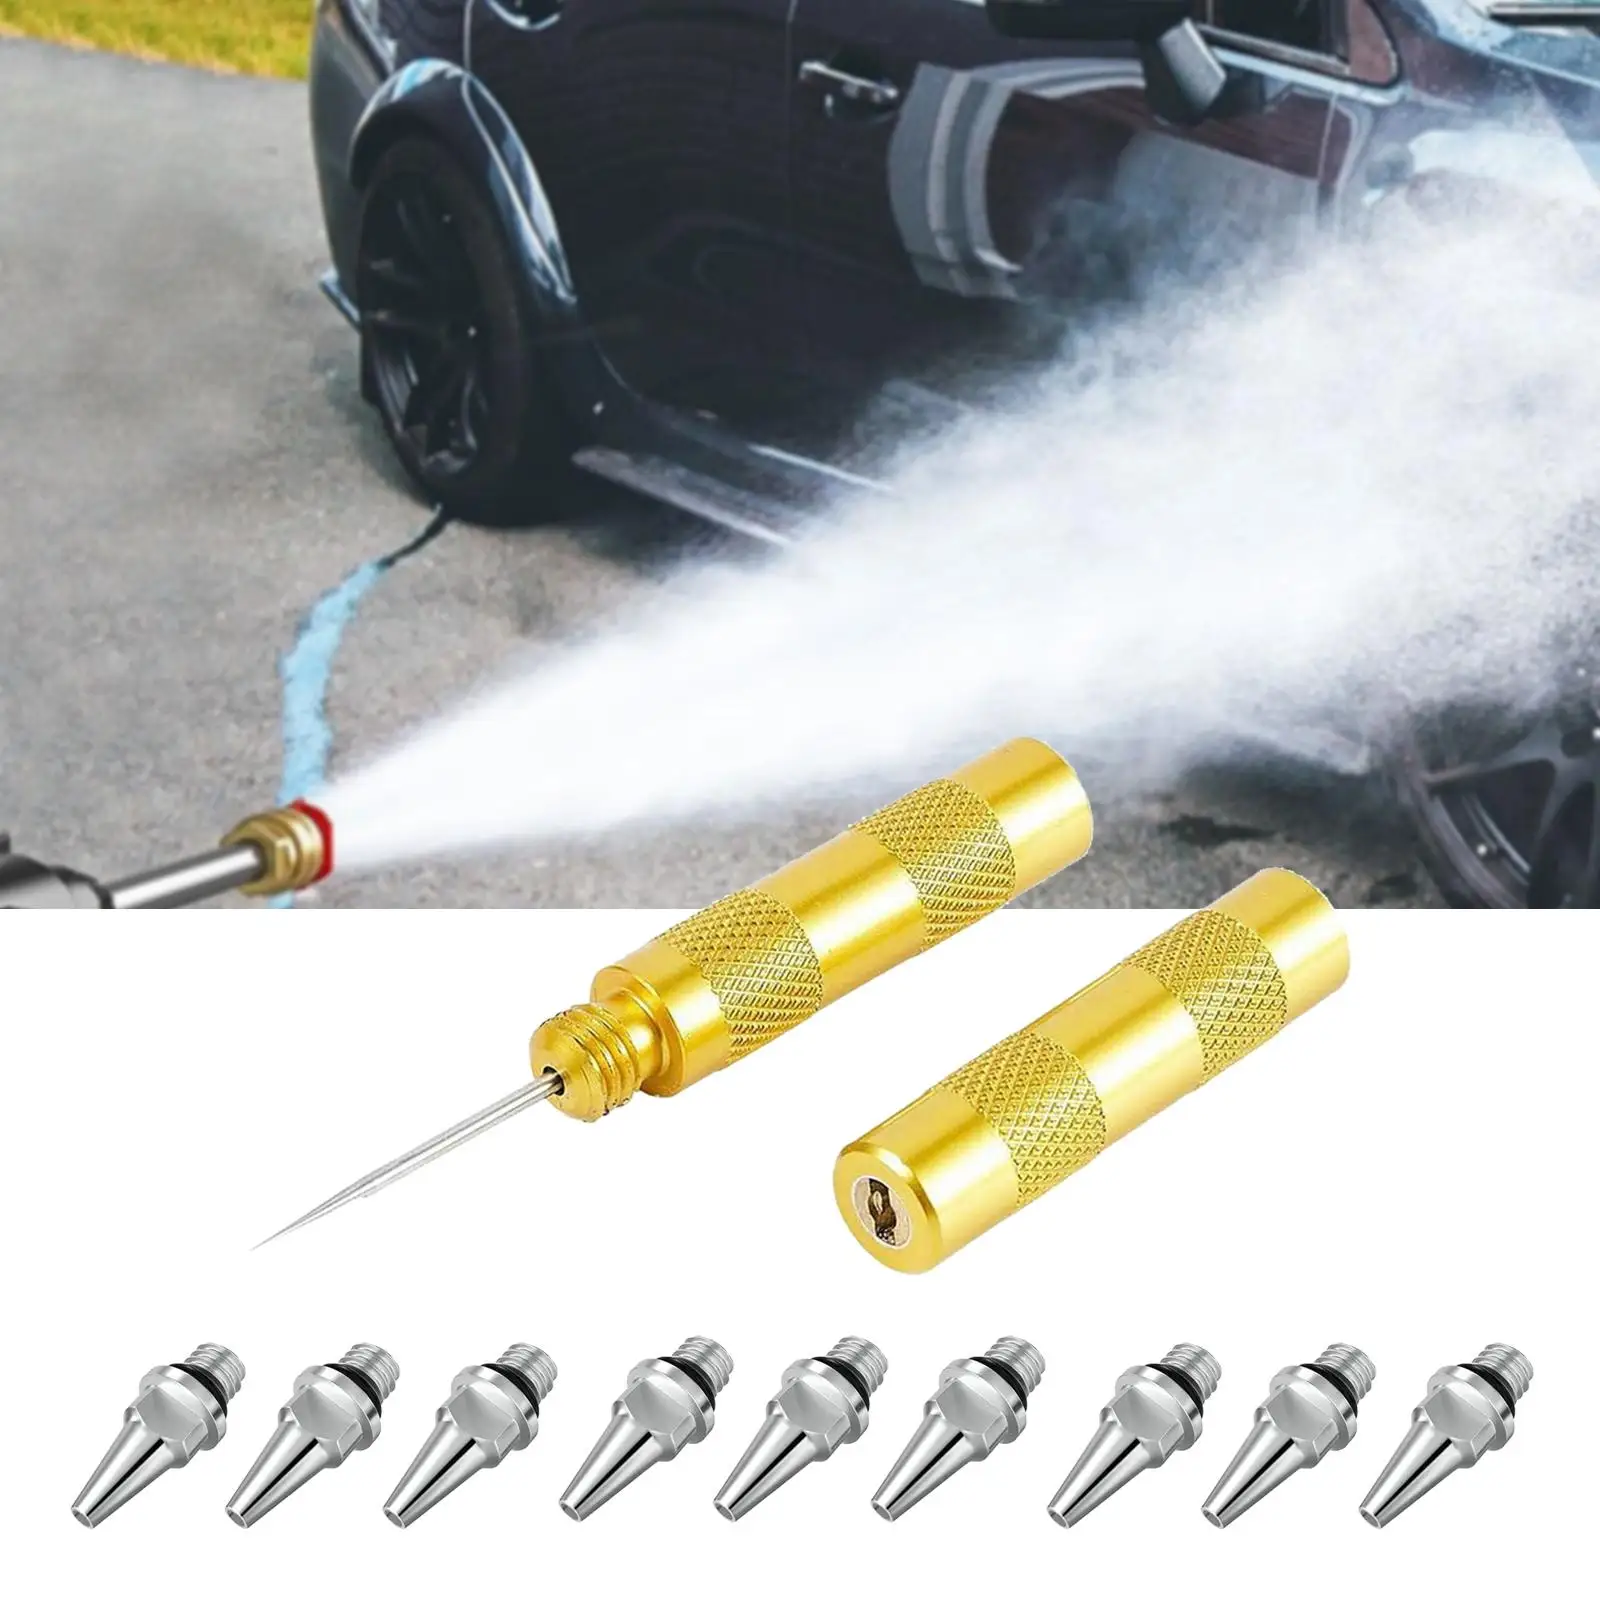 Spray Airbrush Cleaning Nozzle Airbrush Cleaning Nozzle for Cleaning Thin Tubes Remove Nozzle Paint Dirt Auto Parts Cleaning